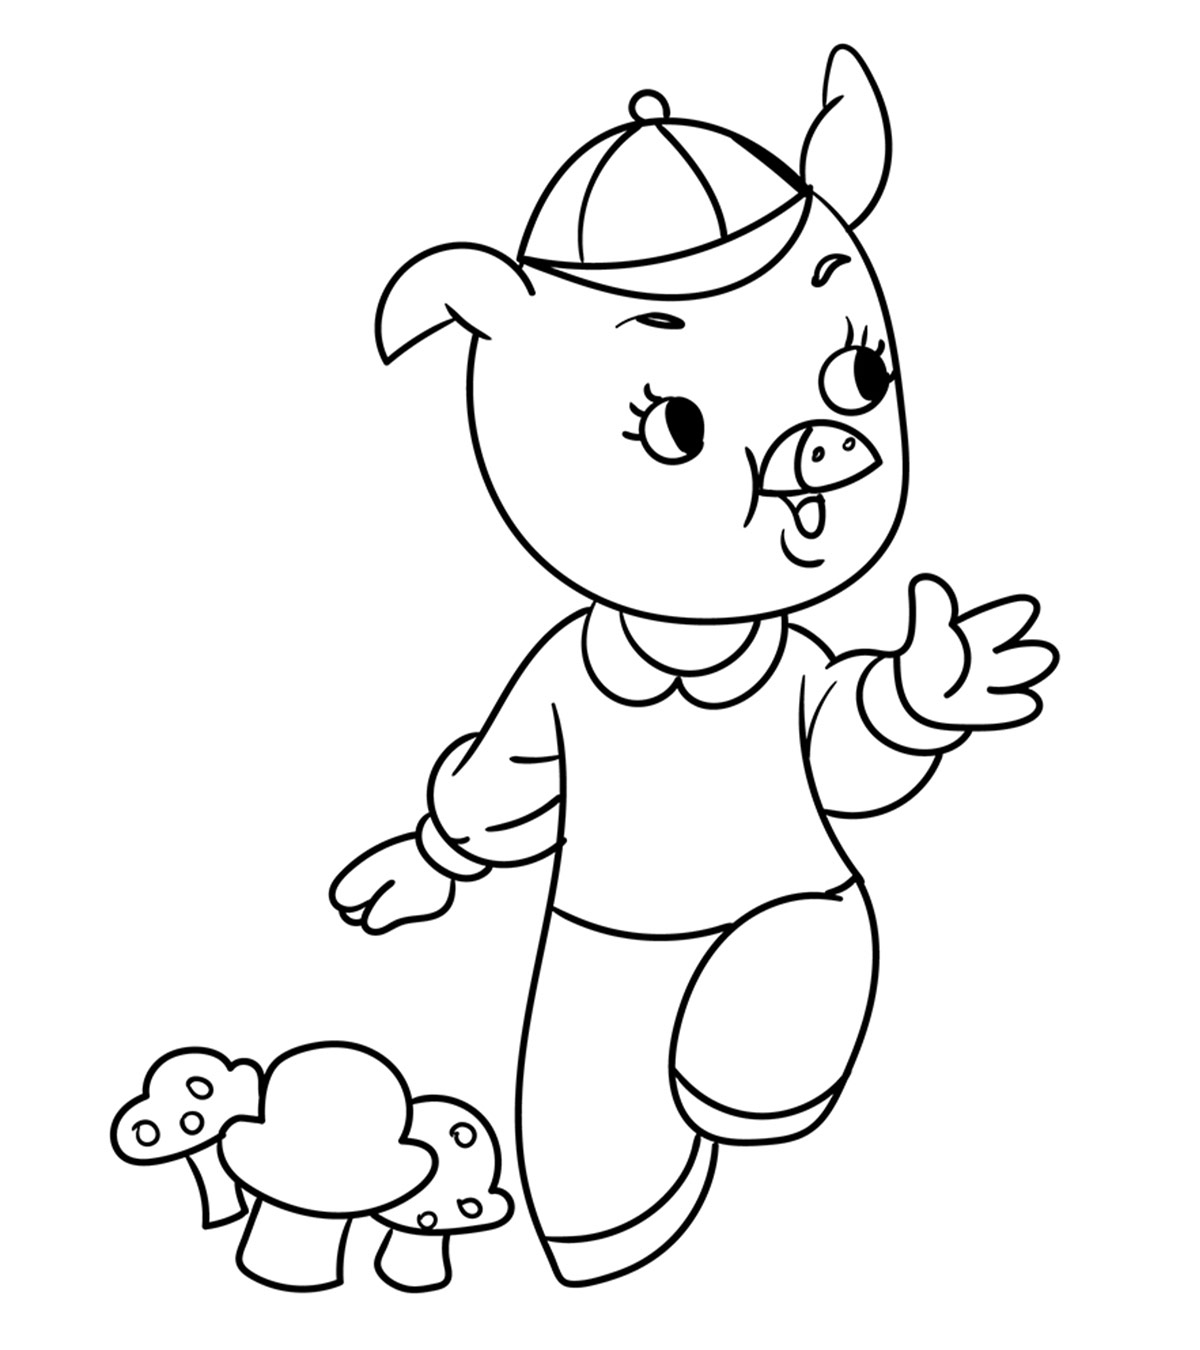 Top 10 Three Little Pigs Coloring Pages Your Toddler Will Love